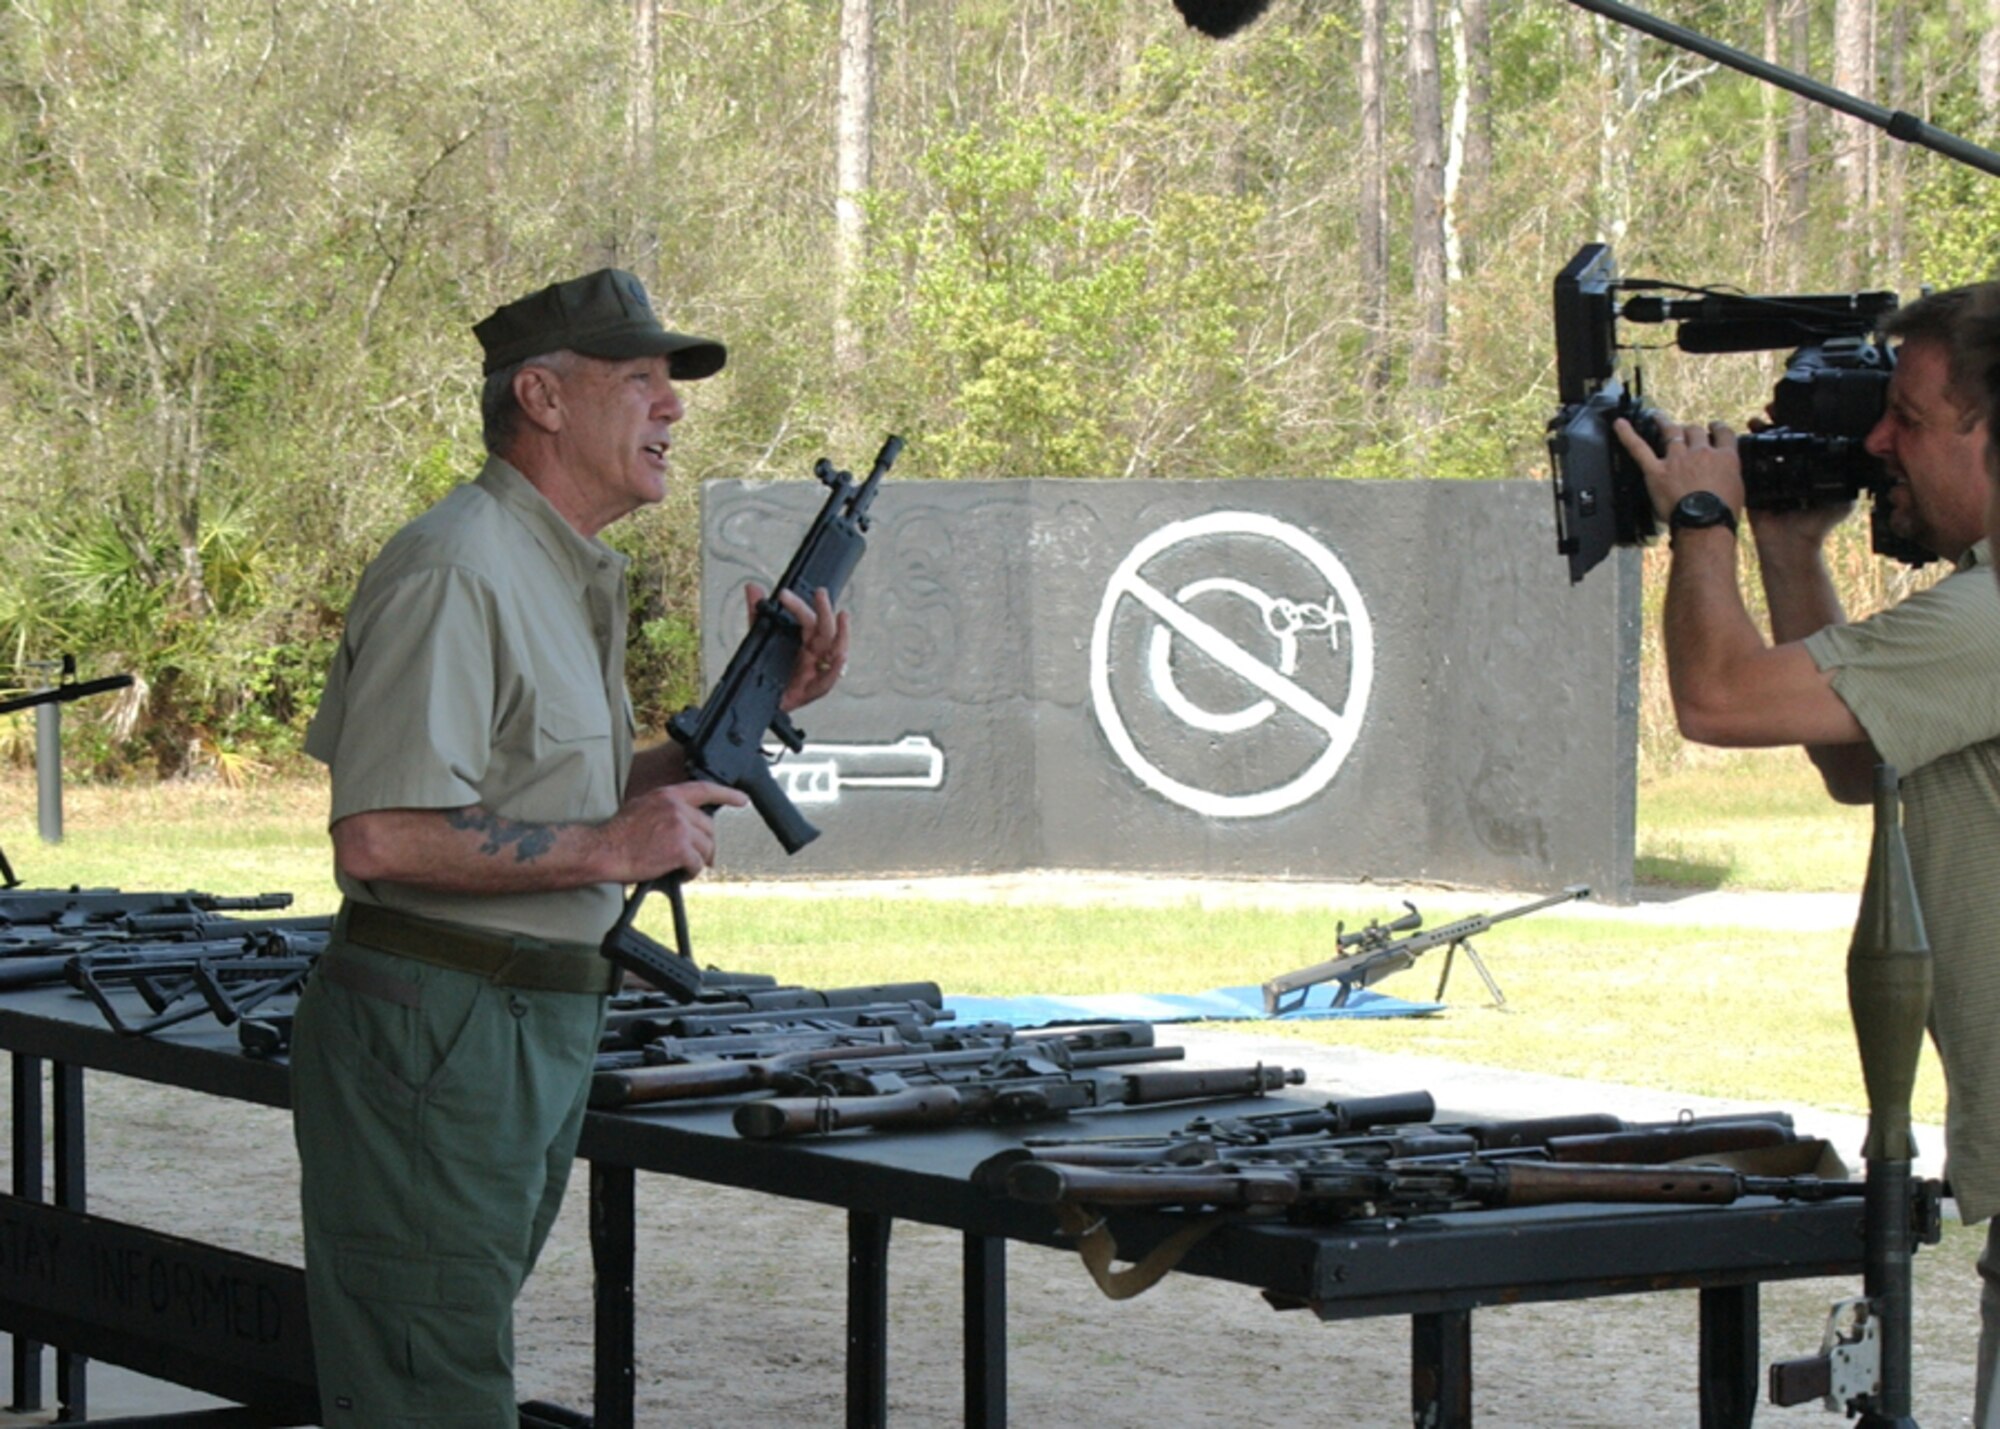 Forty years after its inception, the course offerings at the United States Air Force Special Operations School have expanded and have received the attention of national television shows like Discovery Channel's "Mail Call." Host R. Lee Ermey filmed a segment on the school's Dynamics in Terrorism course in March 2006.  (U.S. Air Force photo by Chief Master Sgt. Gary Emery)